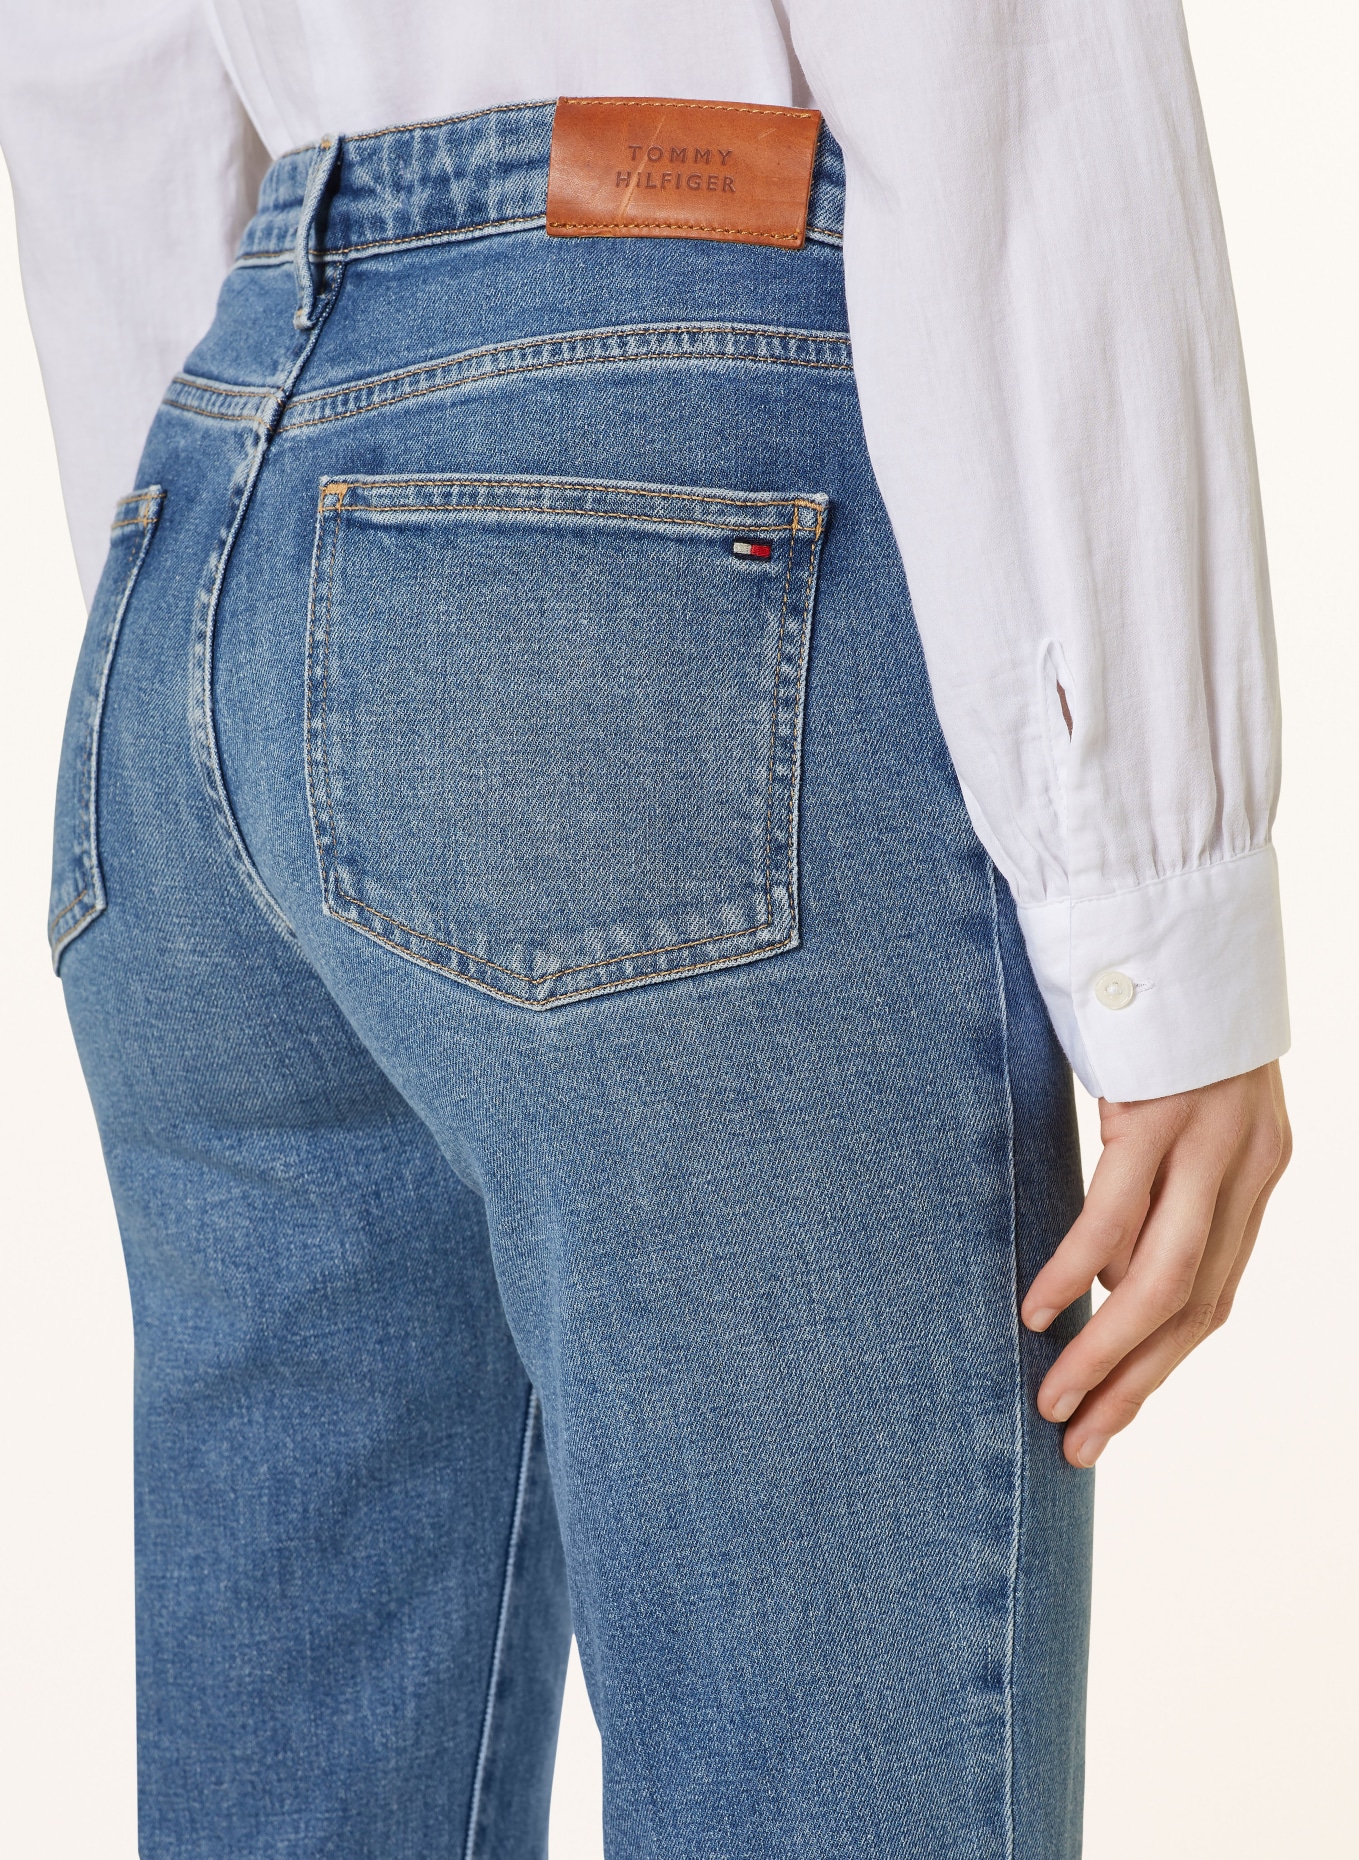 mel TOMMY Jeans in 1a8 HILFIGER Bootcut